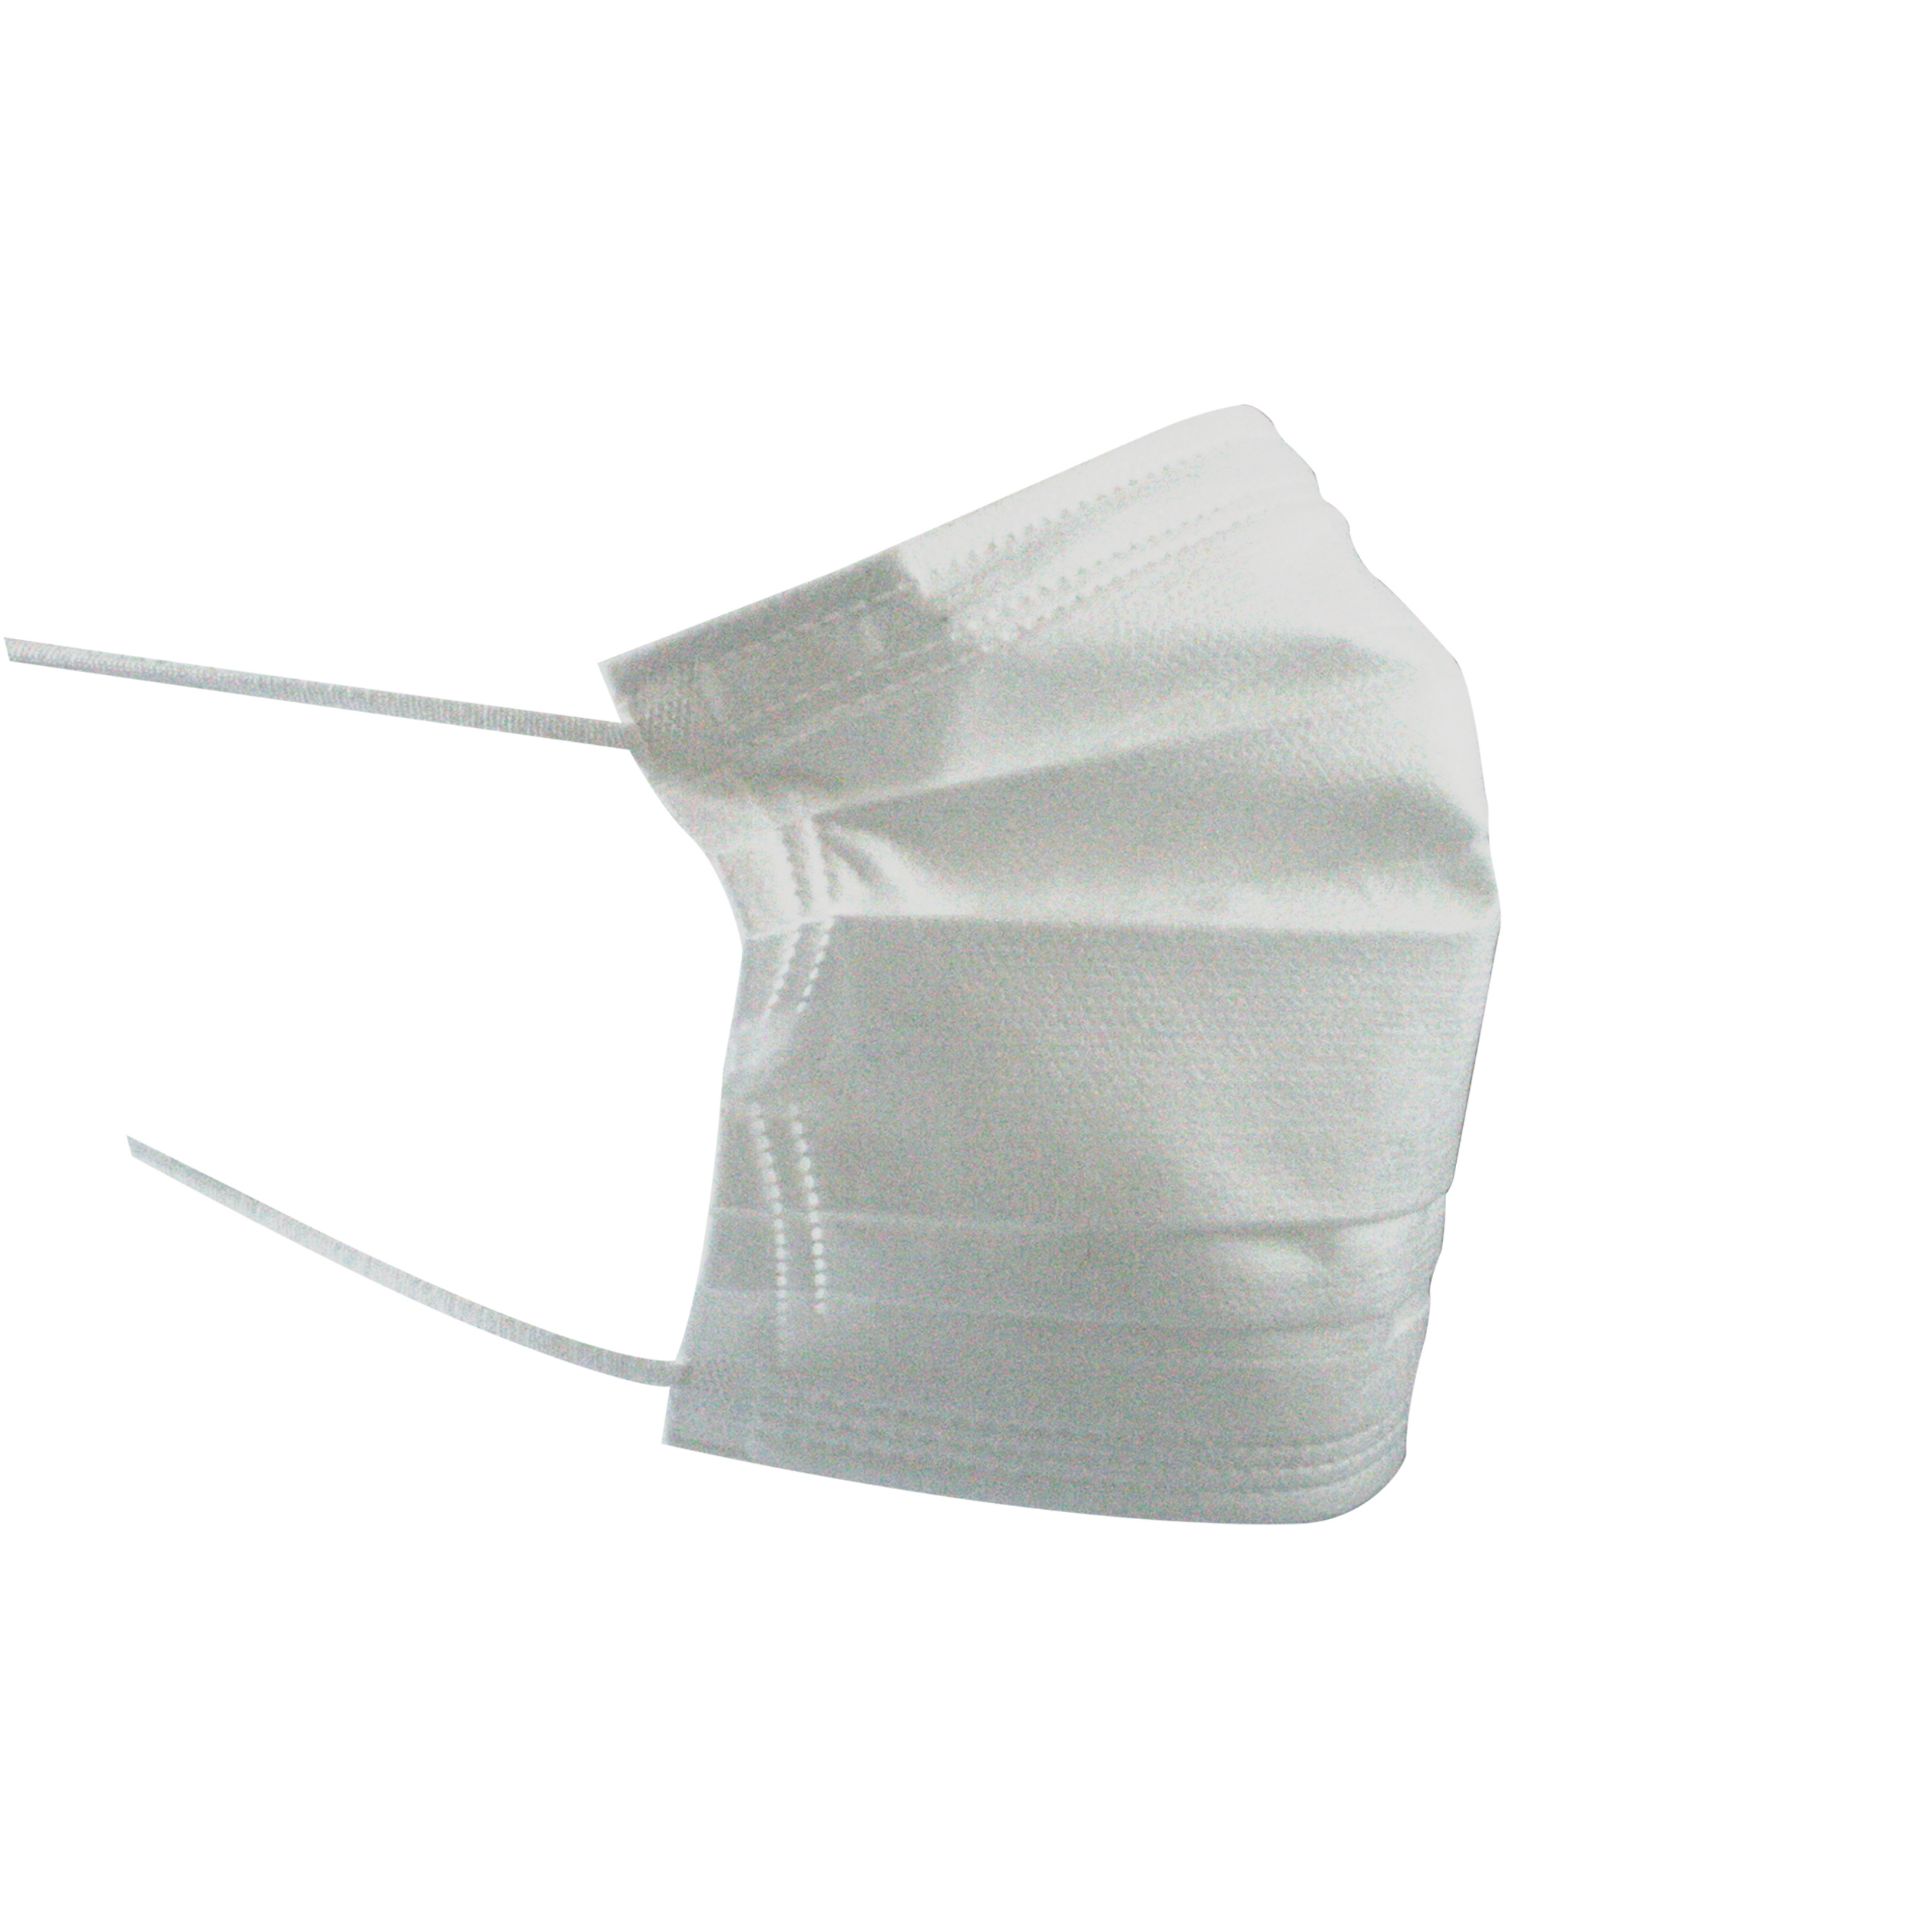 Medical Grade Type IIR disposable face masks: x 2000 - Image 4 of 5